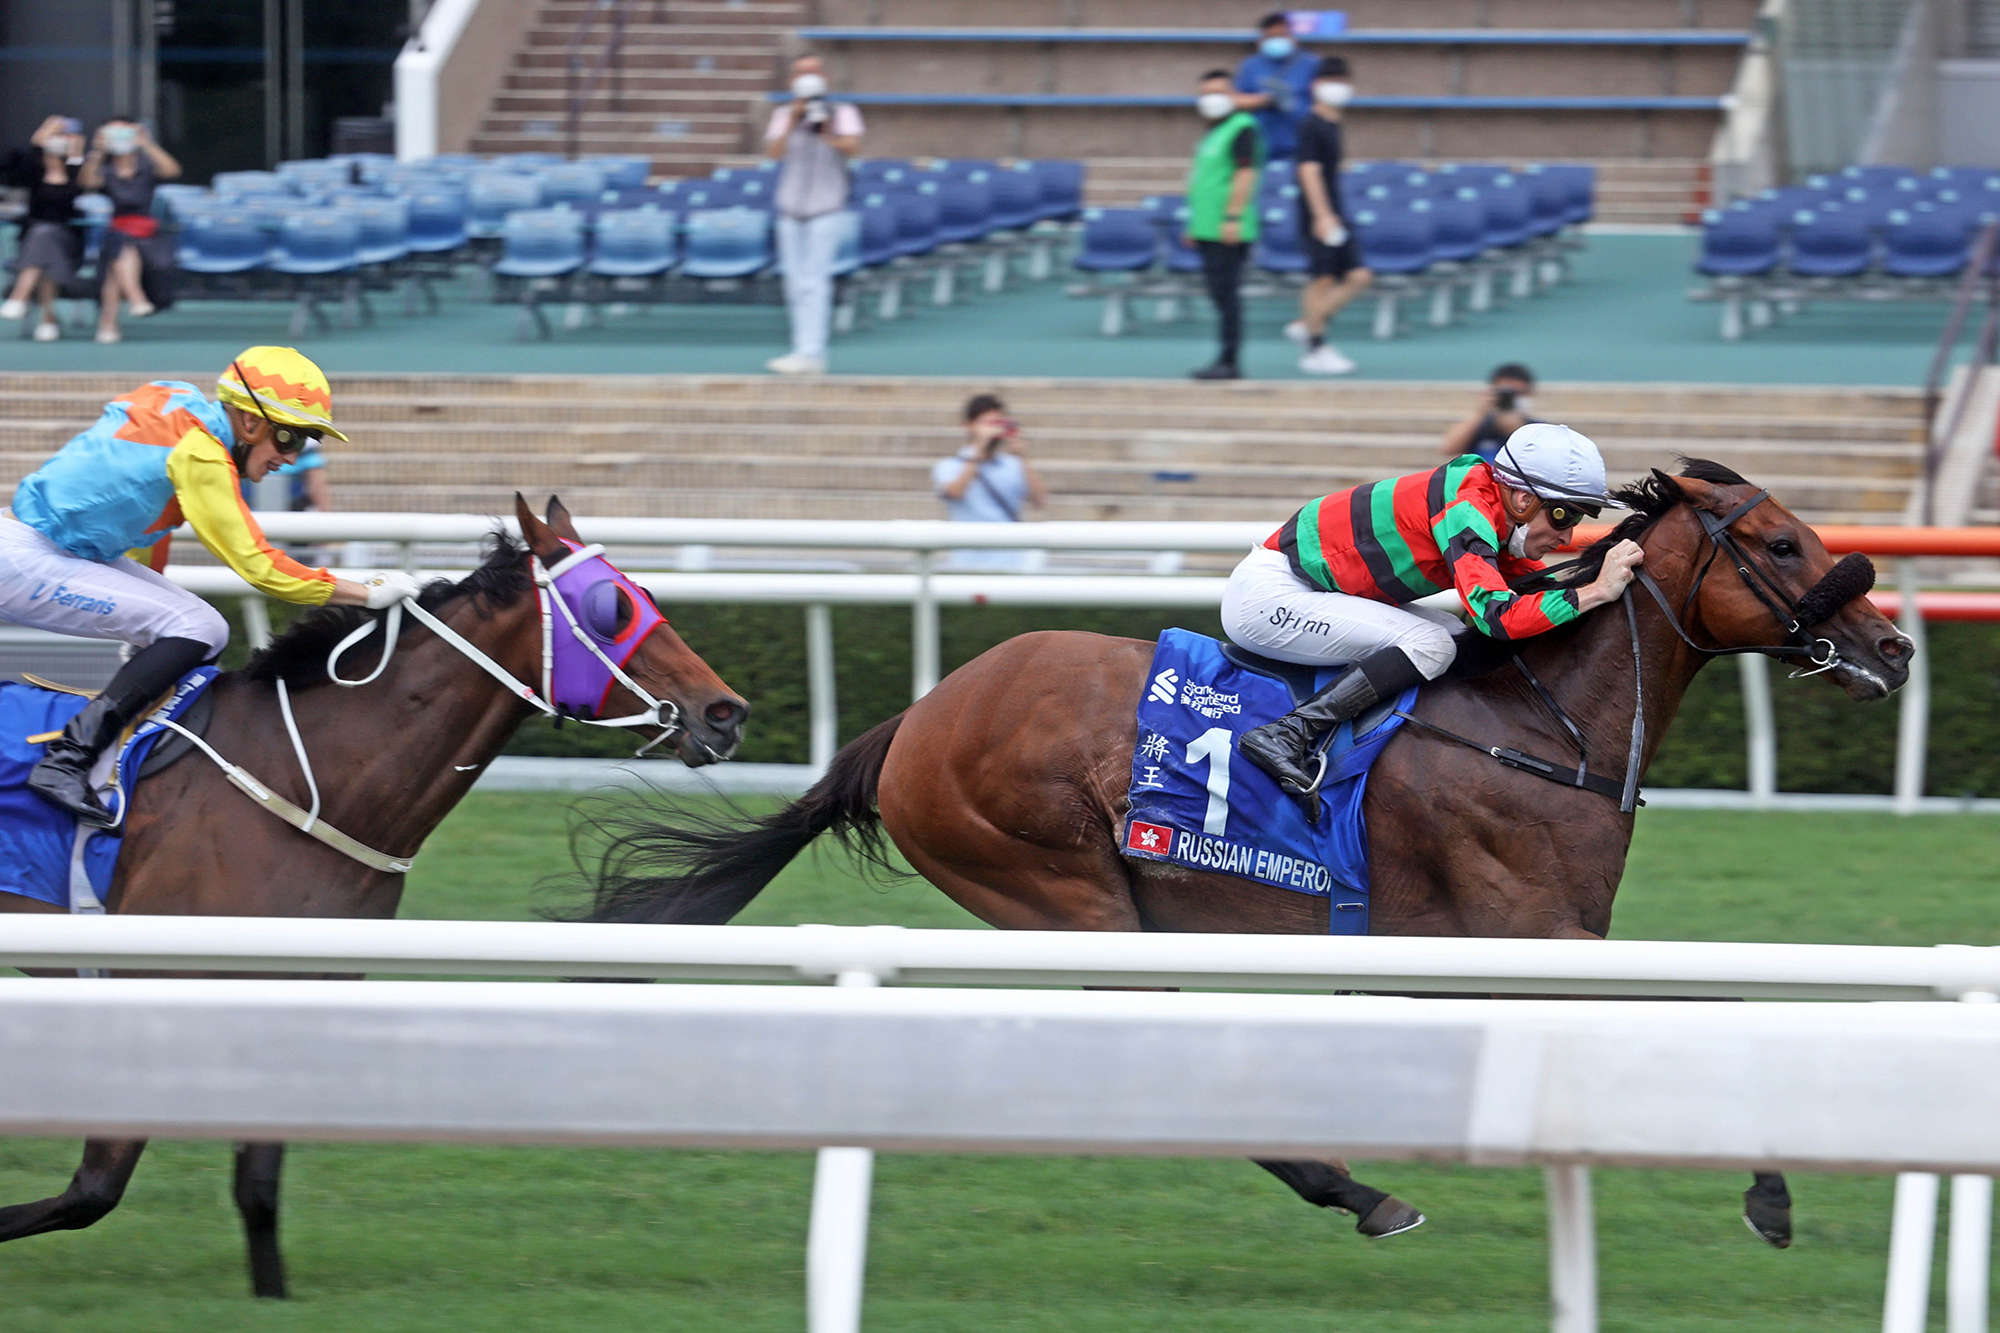 Russian Emperor, trained by Douglas Whyte and ridden by Blake Shinn, wins the G1 Standard Chartered Champions & Chater Cup (2400m) at Sha Tin Racecourse today.